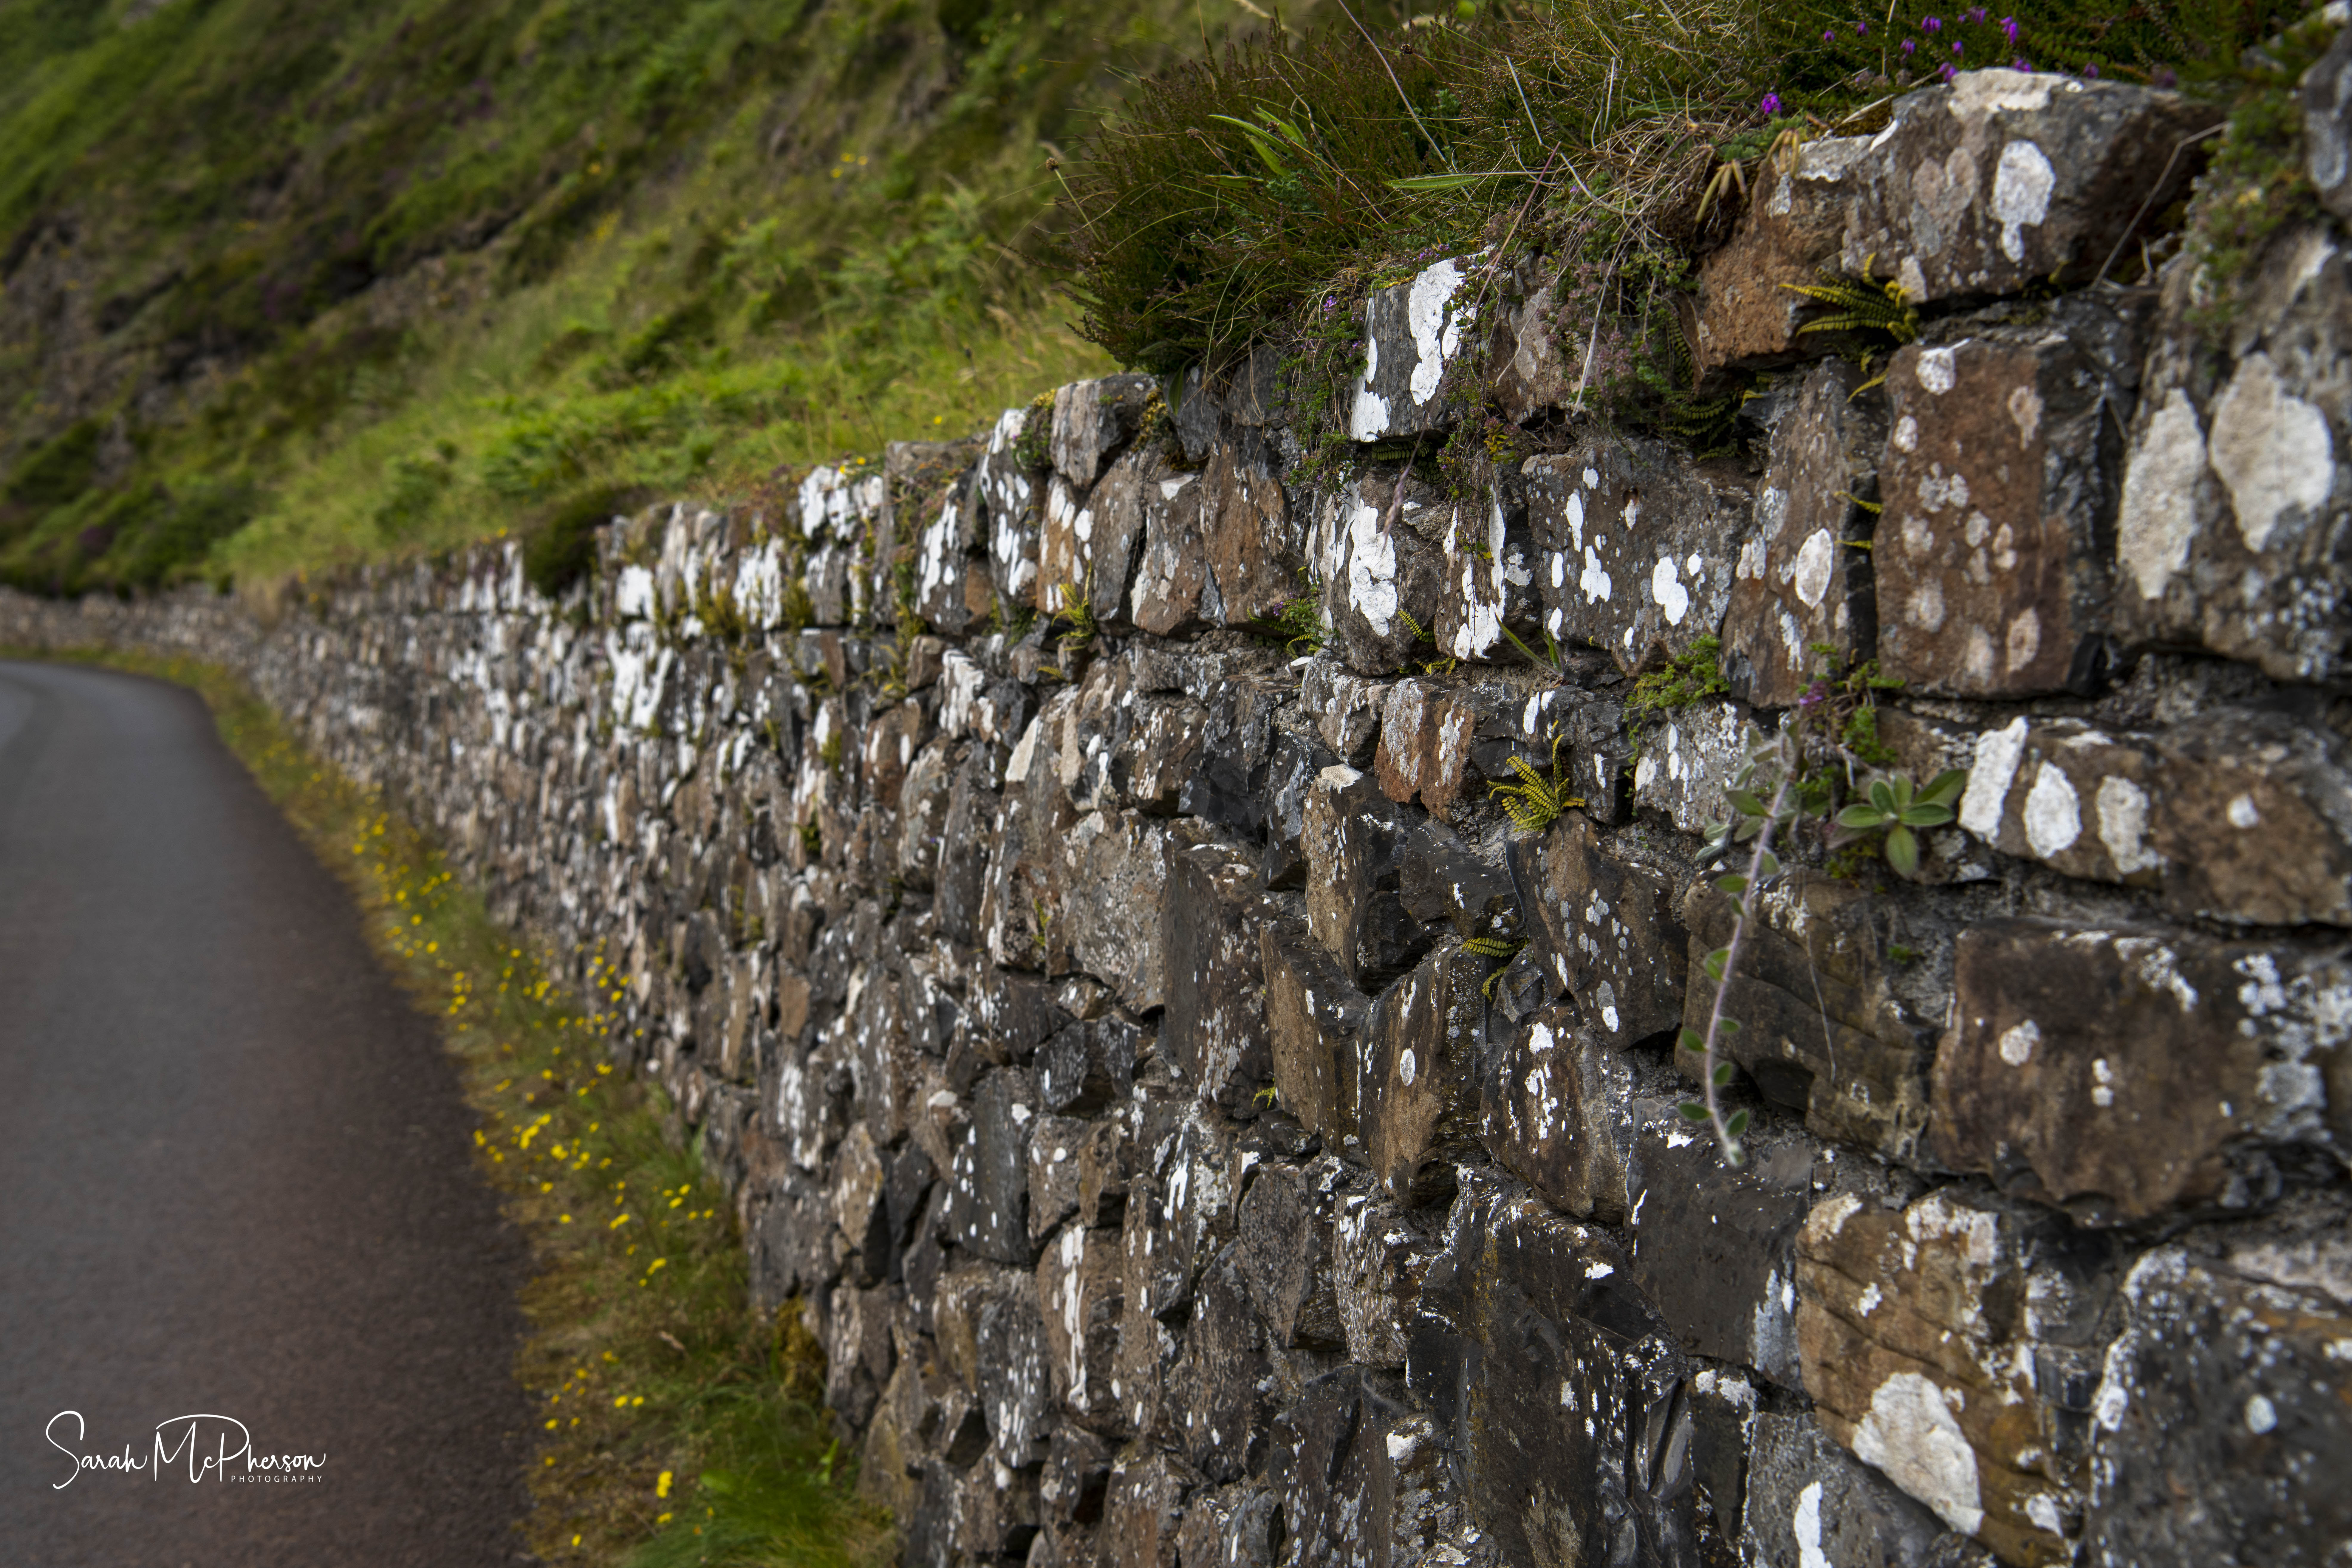 The Path to the Giant Causeway